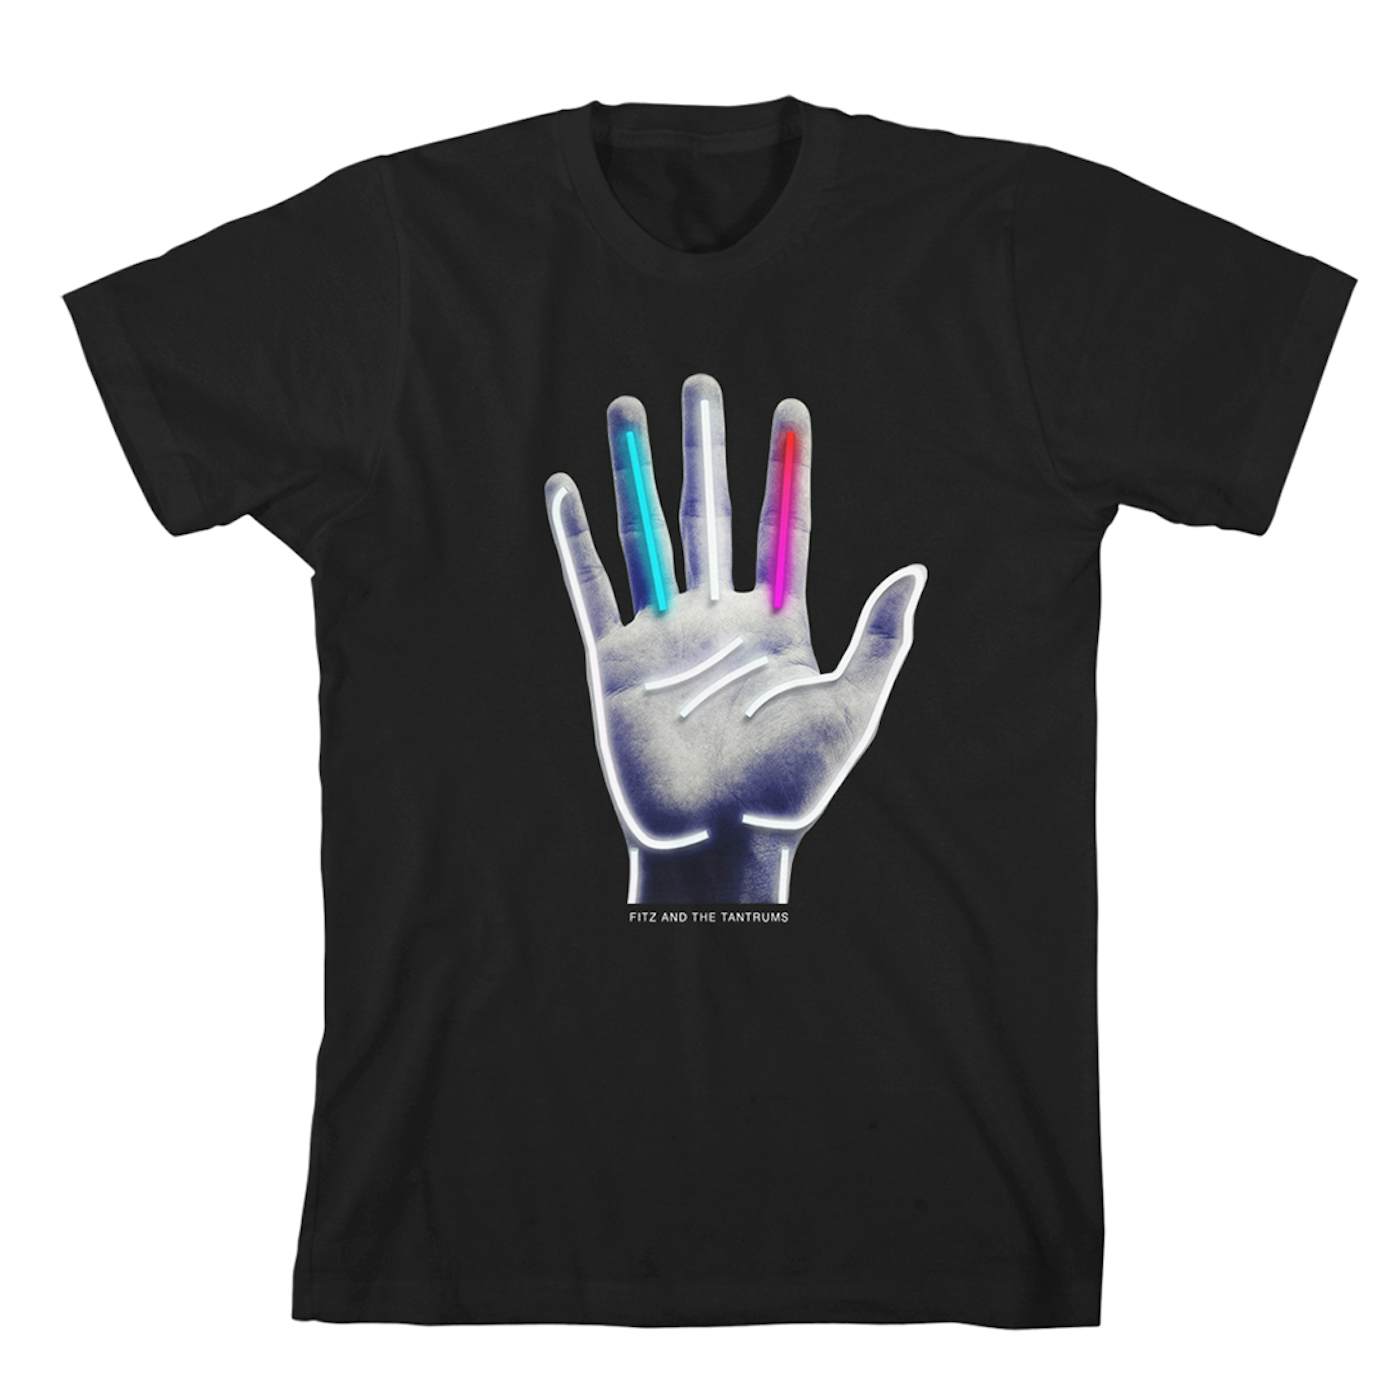 Fitz and The Tantrums "Hand" T-Shirt